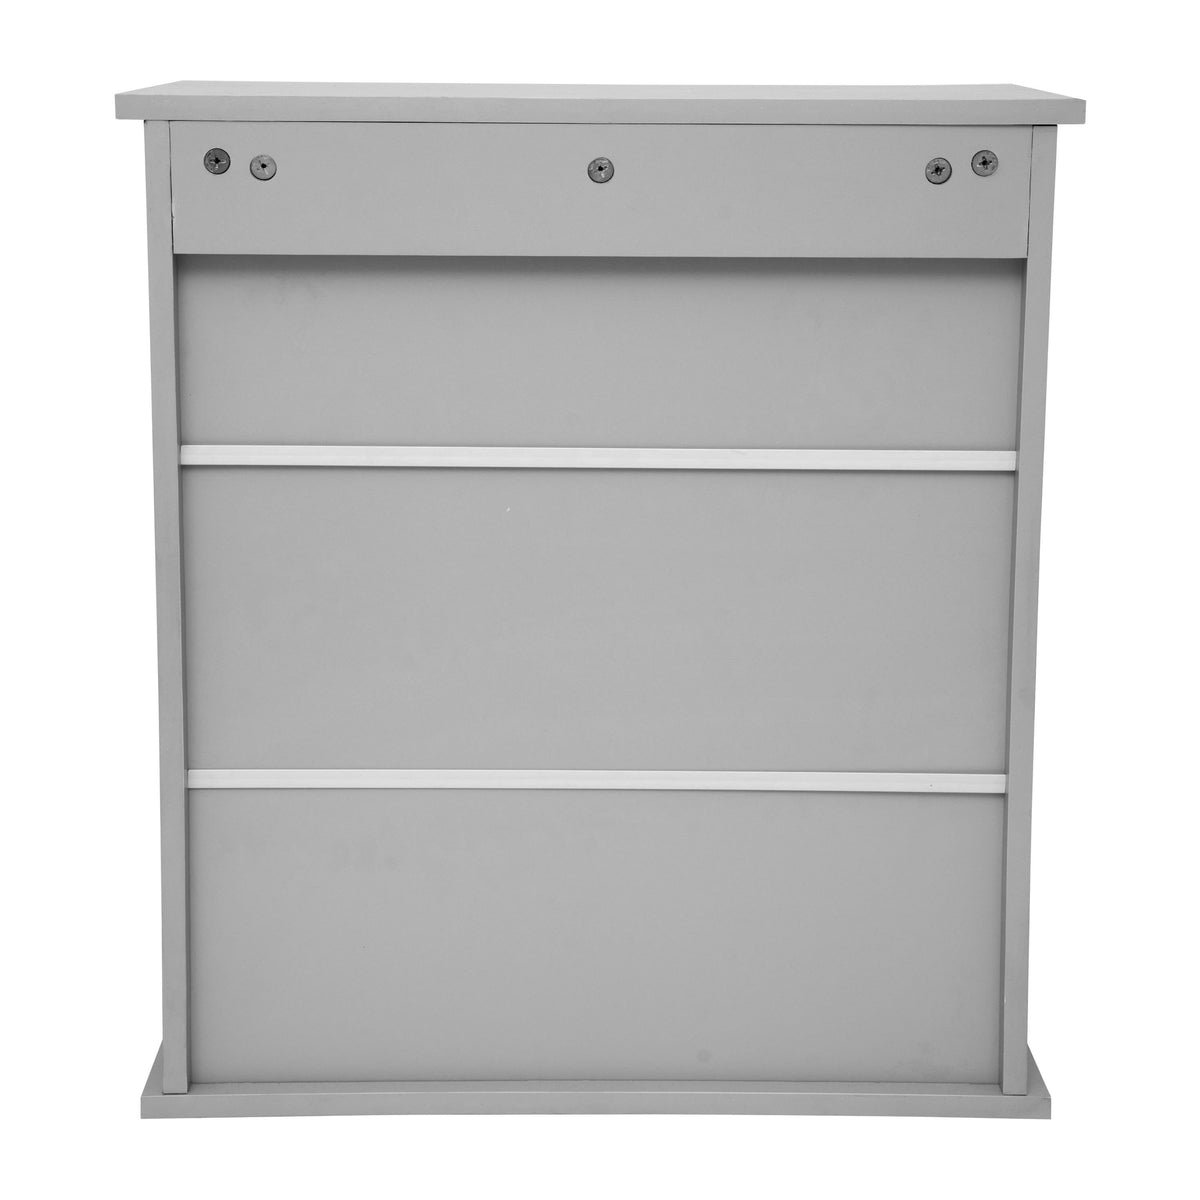 Gray |#| Modern Bathroom Wall Mount Medicine Cabinet with Magnetic Close Doors in Gray